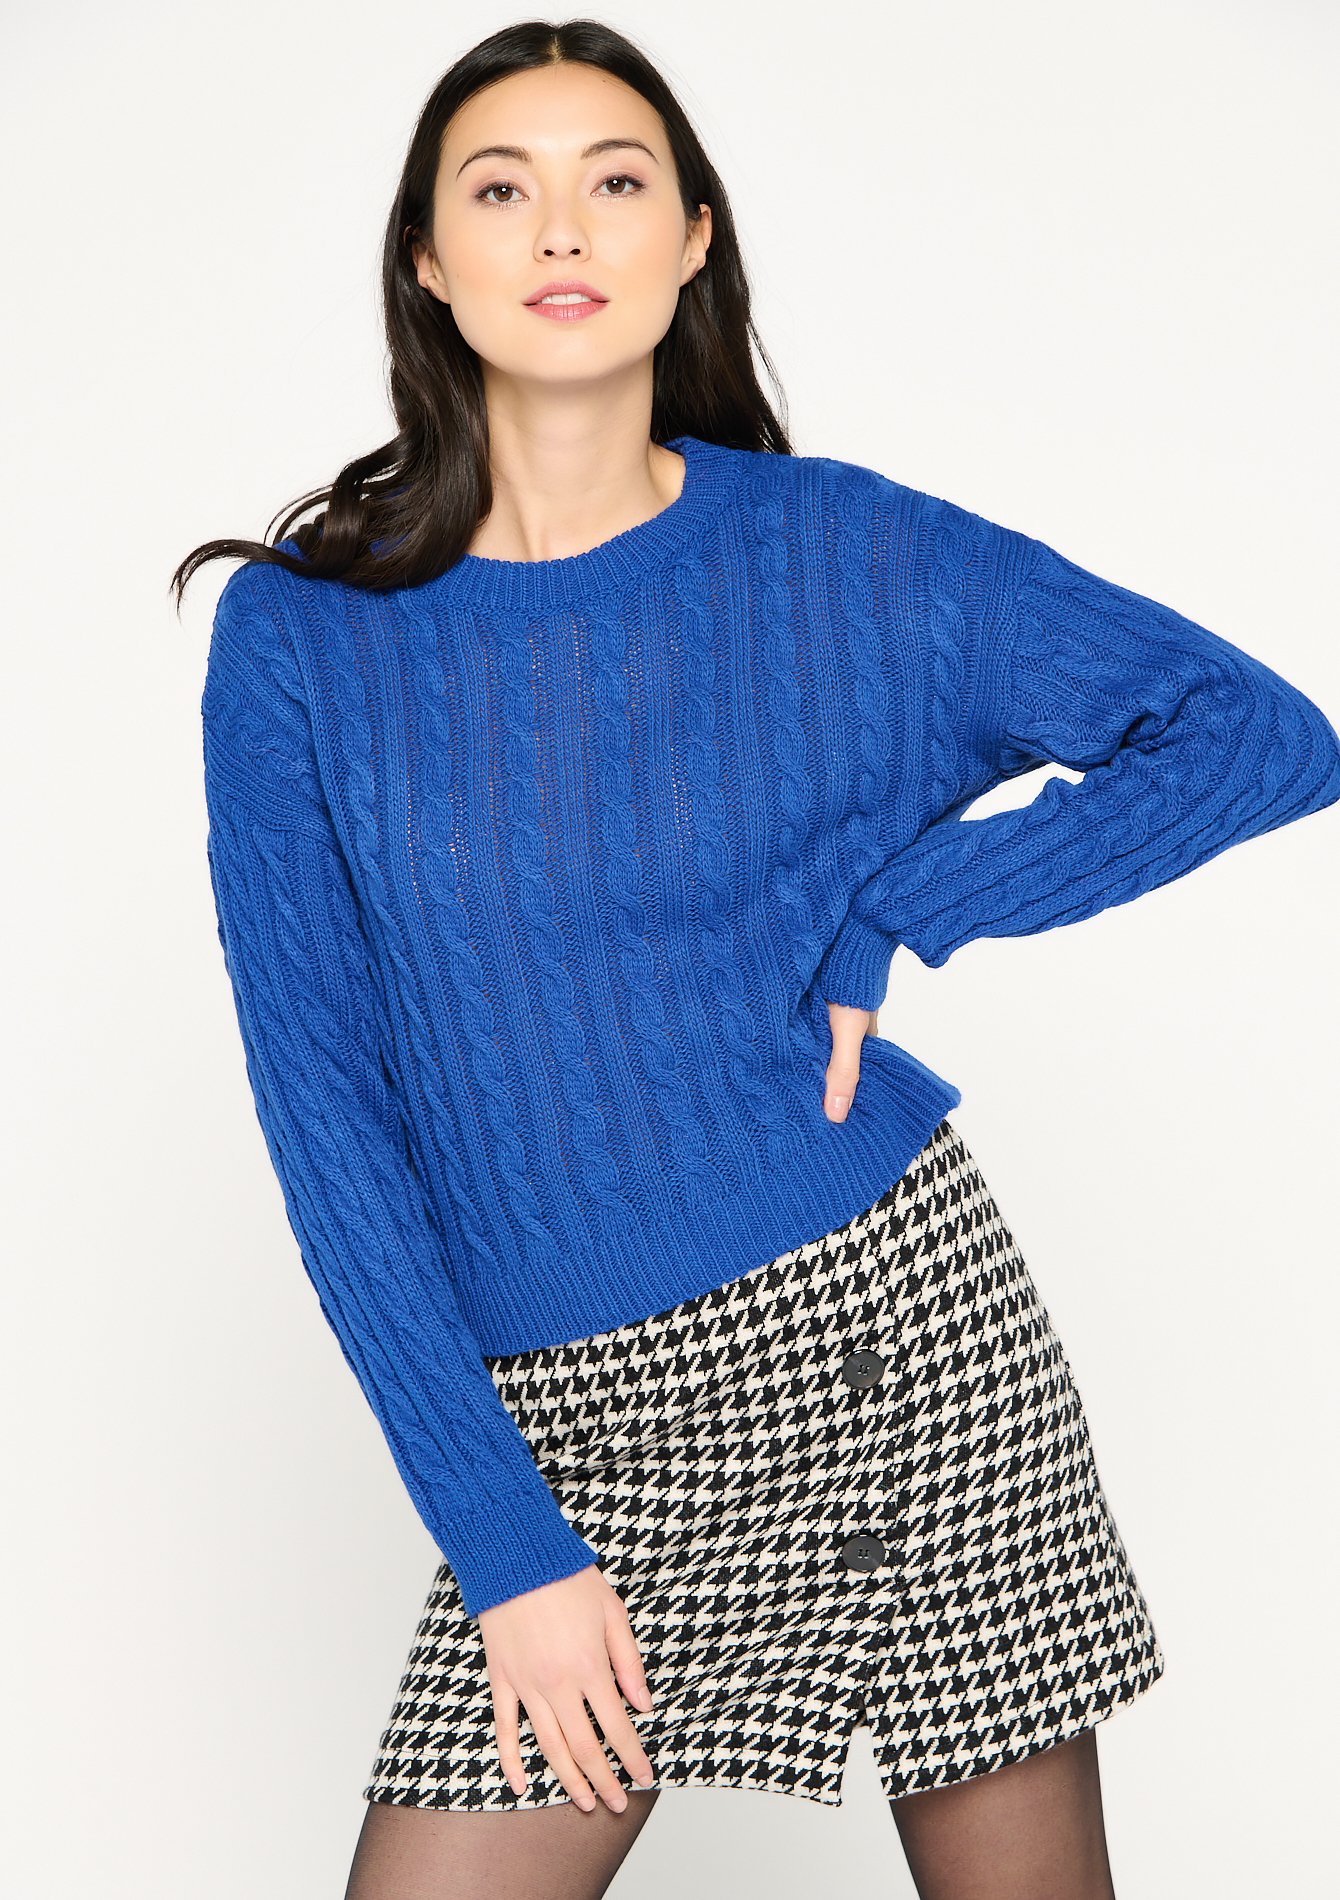 Round-neck sweater with cable pattern - ELECTRIC BLUE - 04005766_1619